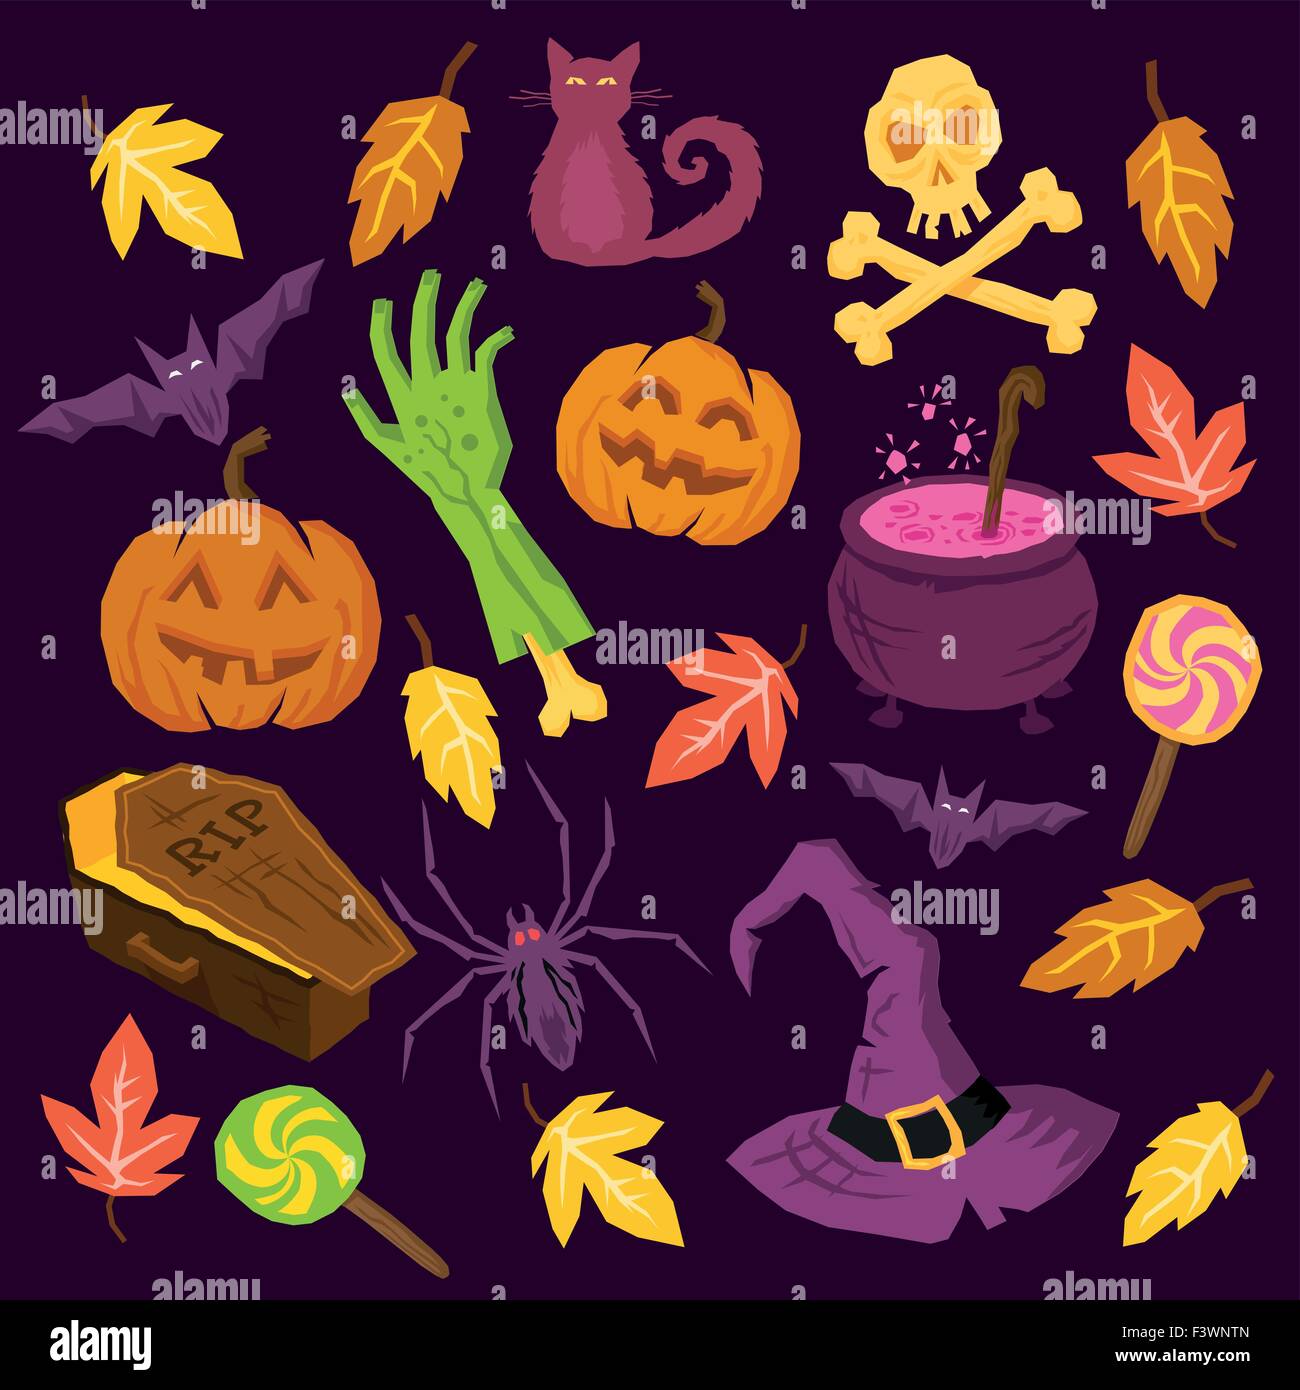 Spooky Halloween Symbols including pumpkins, bats, spiders, zombie arm and witches hat! Vector illustration. Stock Vector